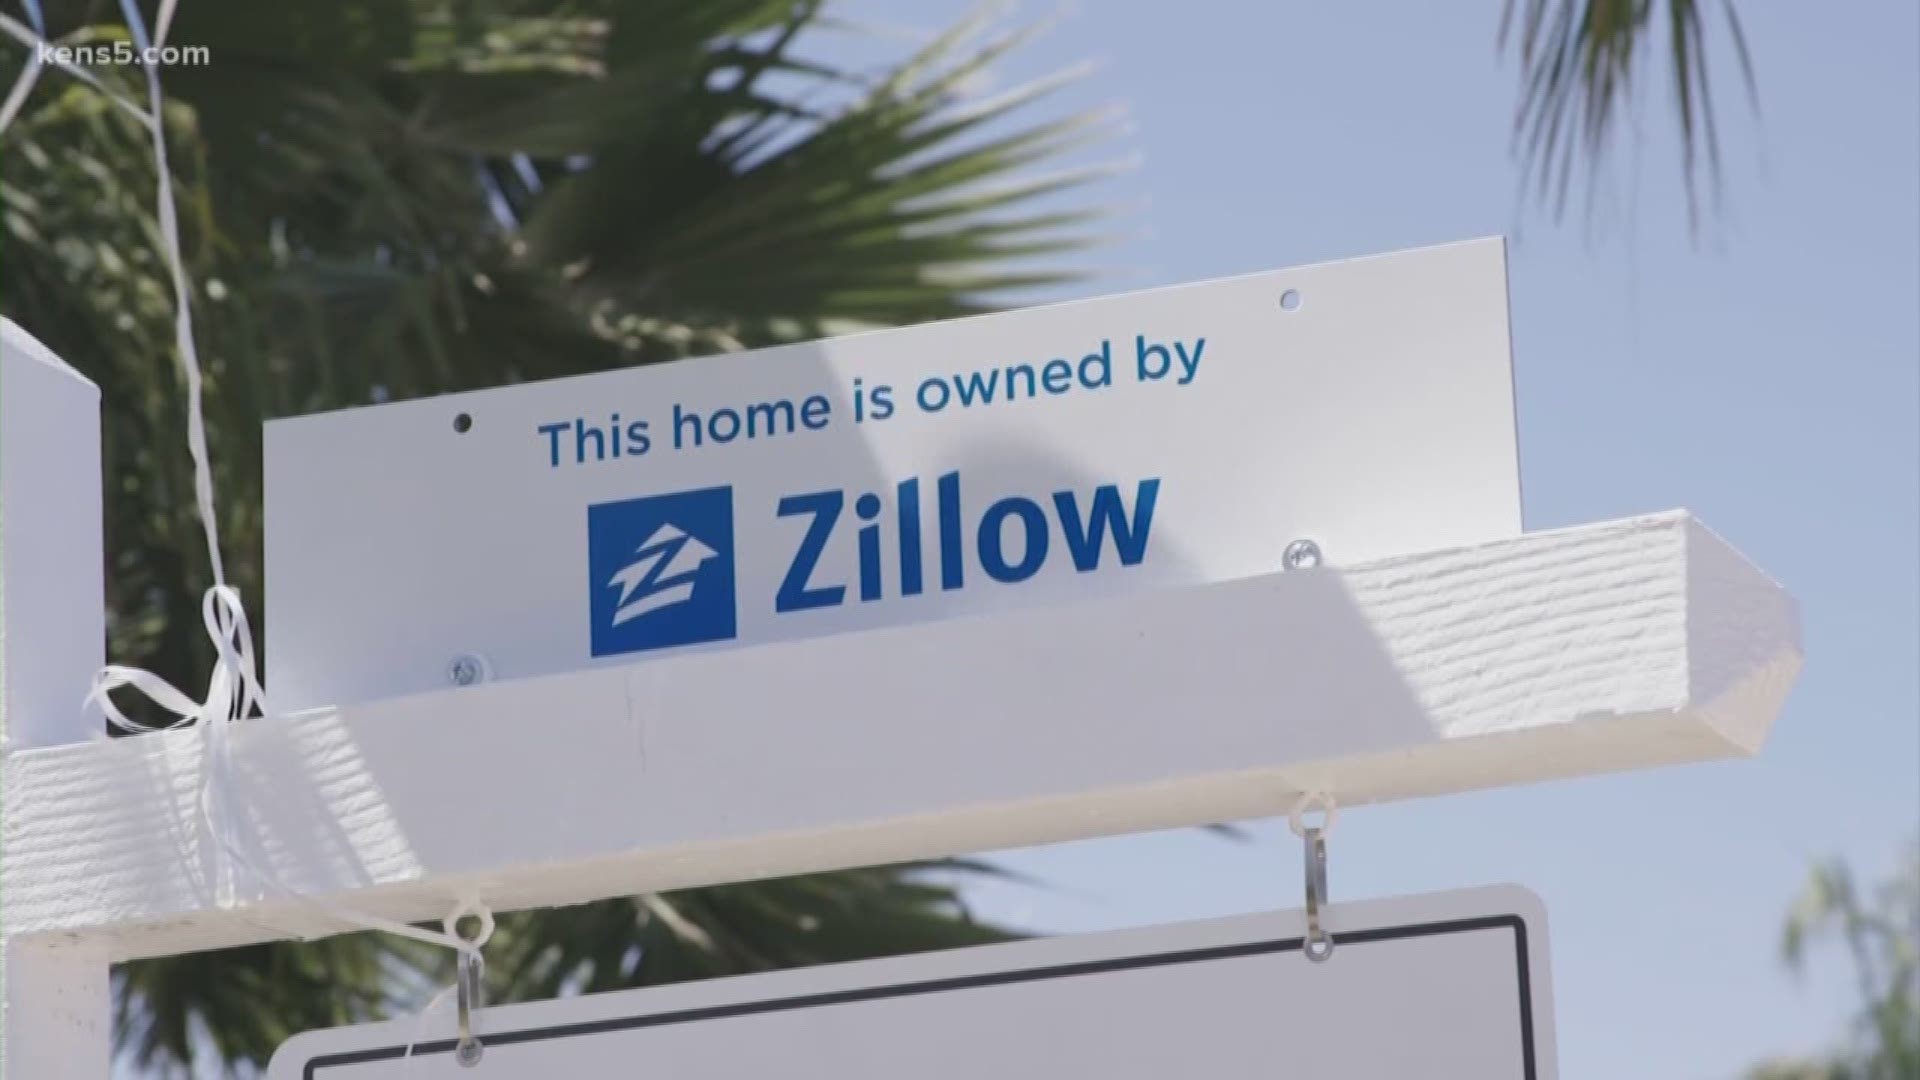 Zillow is among the several online options that allows homeowners to sell their home online and get a cash offer.